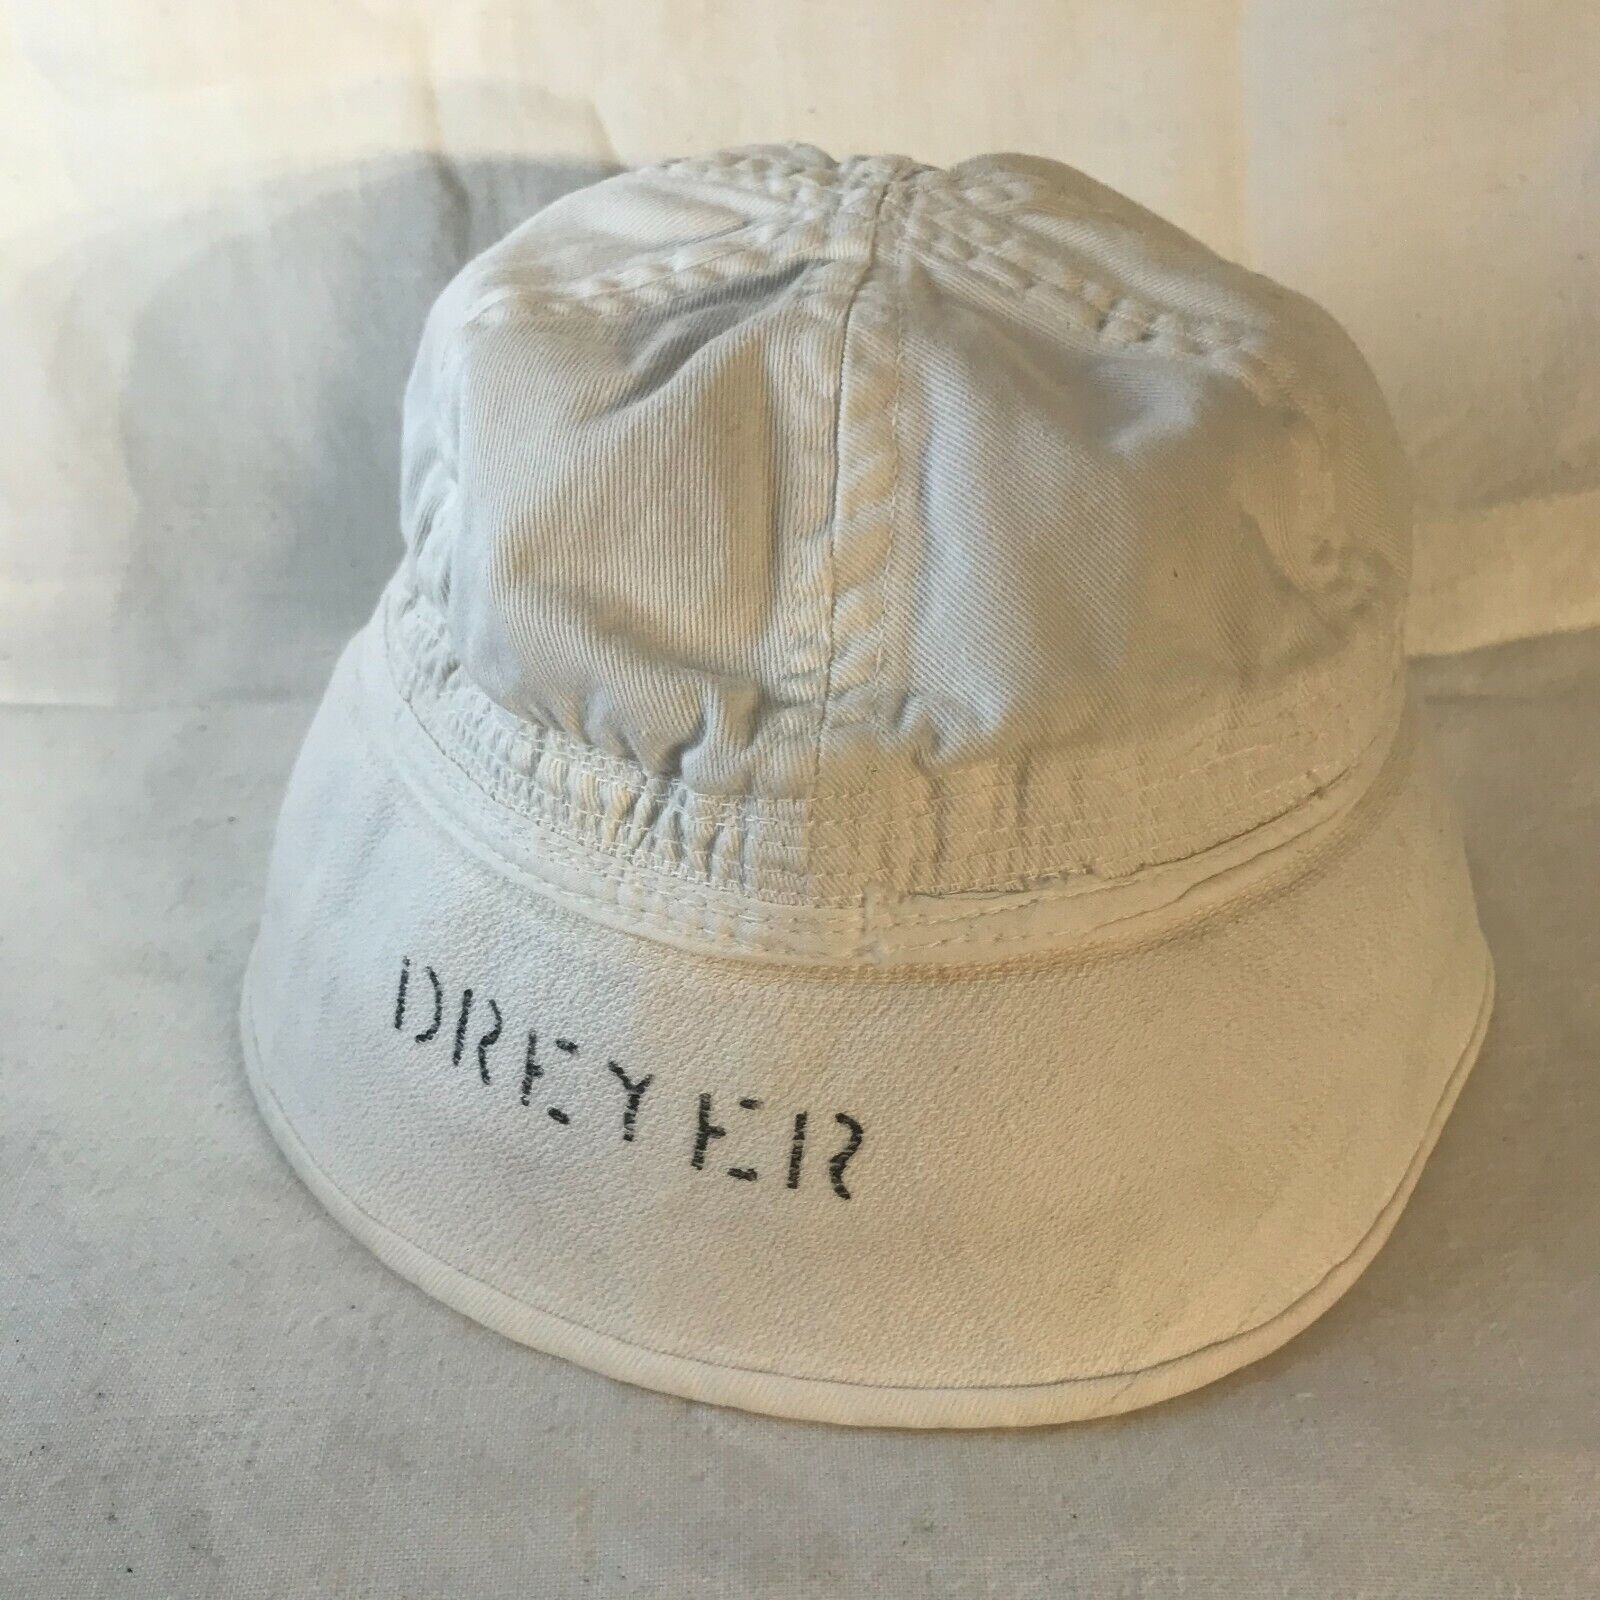 Vintage White US Navy Dixie Sailor Bucket Hat Cap Military Retro Fitted Cotton